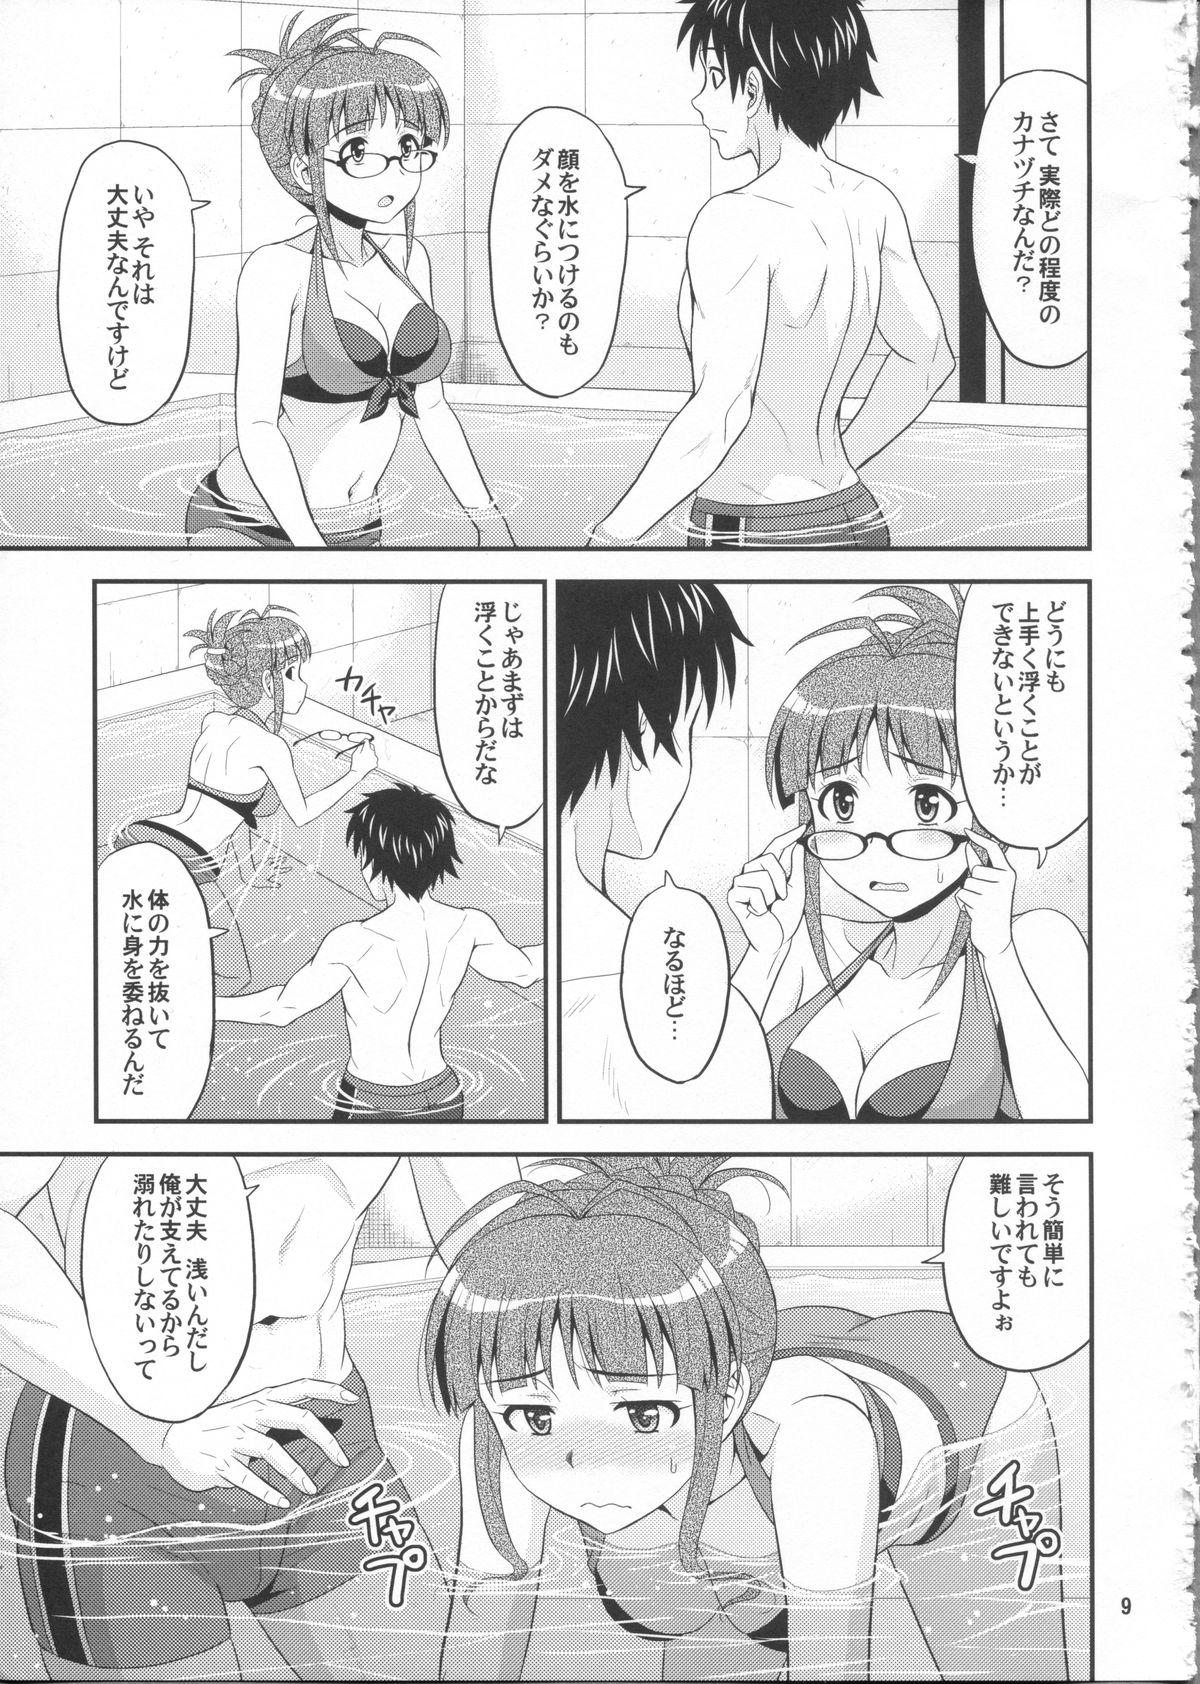 Retro Training for You! - The idolmaster Femdom Clips - Page 9